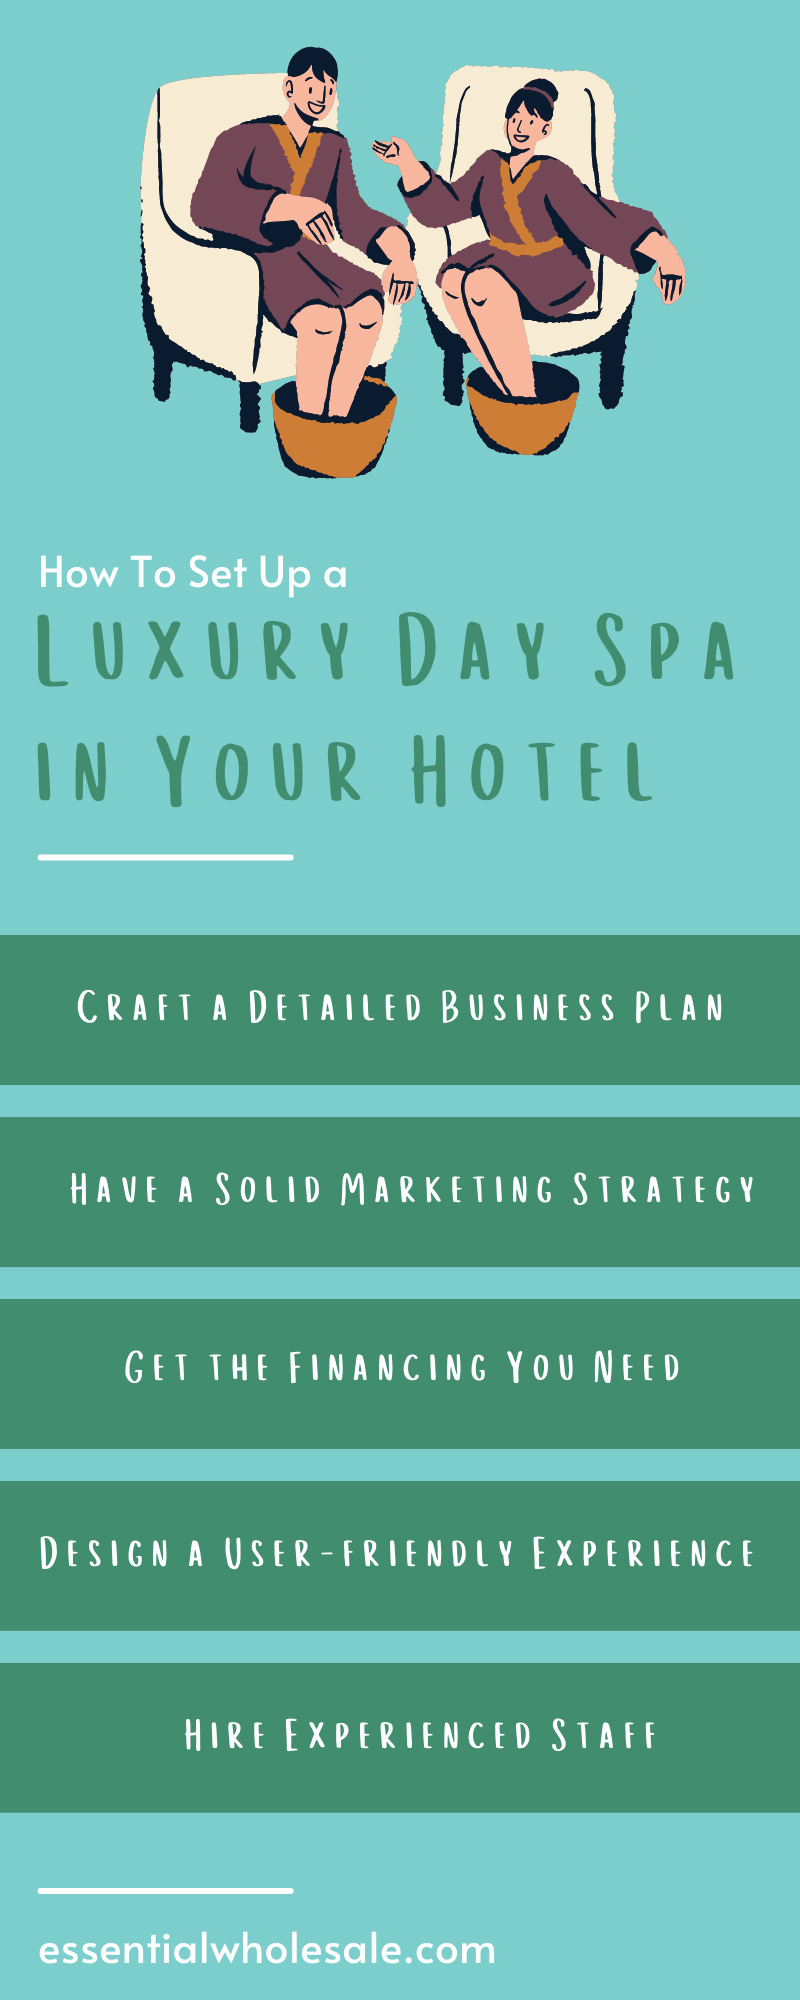 How To Set Up a Luxury Day Spa in Your Hotel